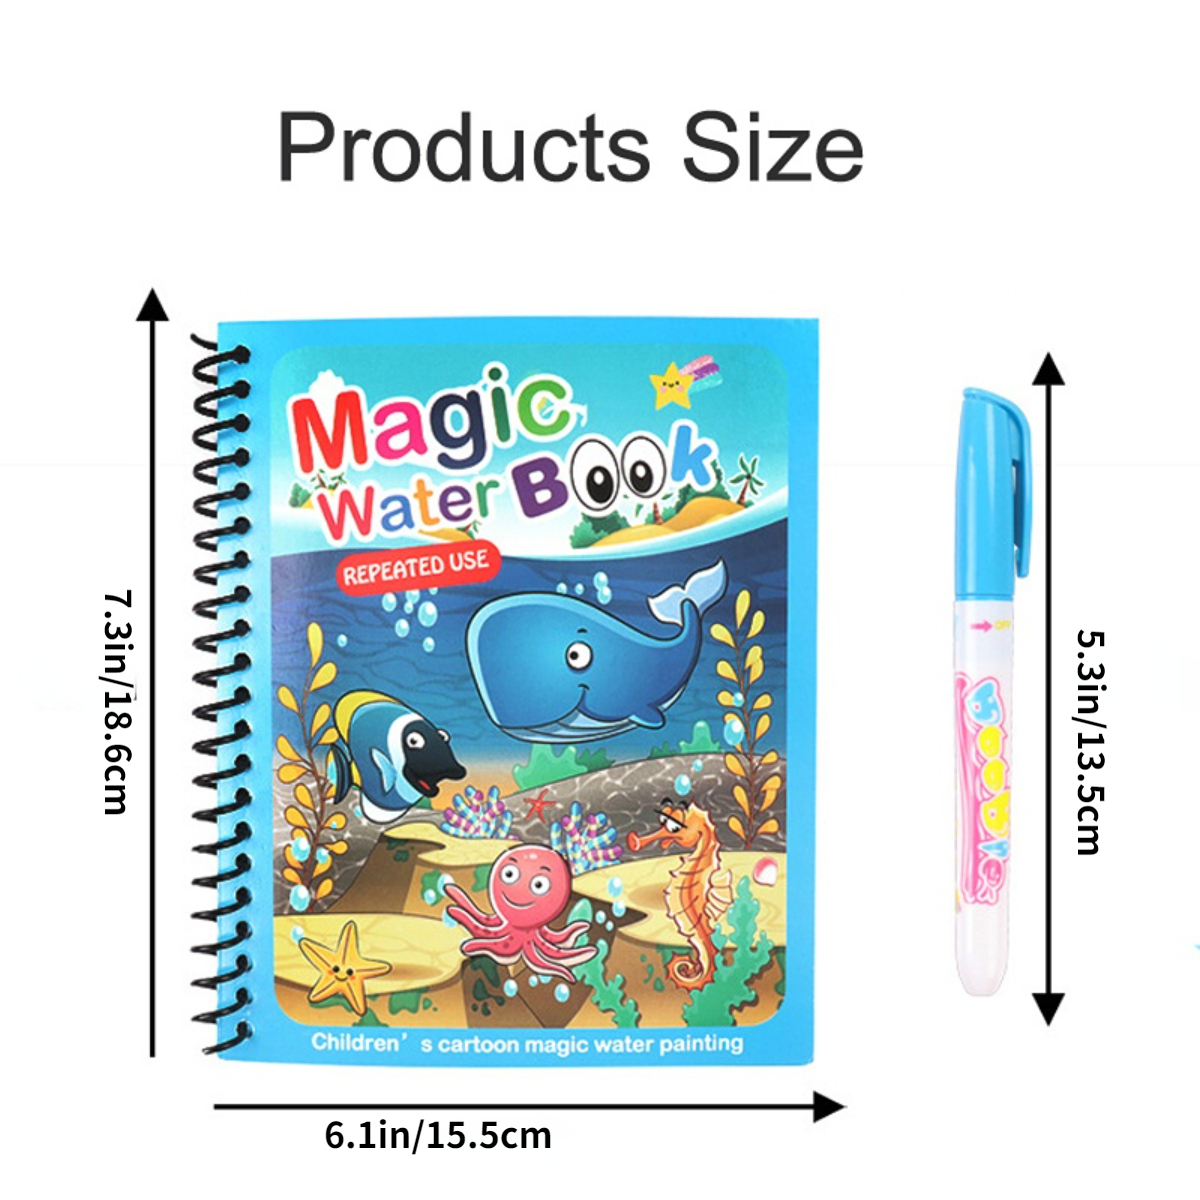  Reusable Water Coloring Books for Toddlers,Paint with Water  Books,Mess-Free Coloring Book,Portable Educational Drawing Toy,Improving  Children's Imagination,Color Perception,Painting Skill : Toys & Games